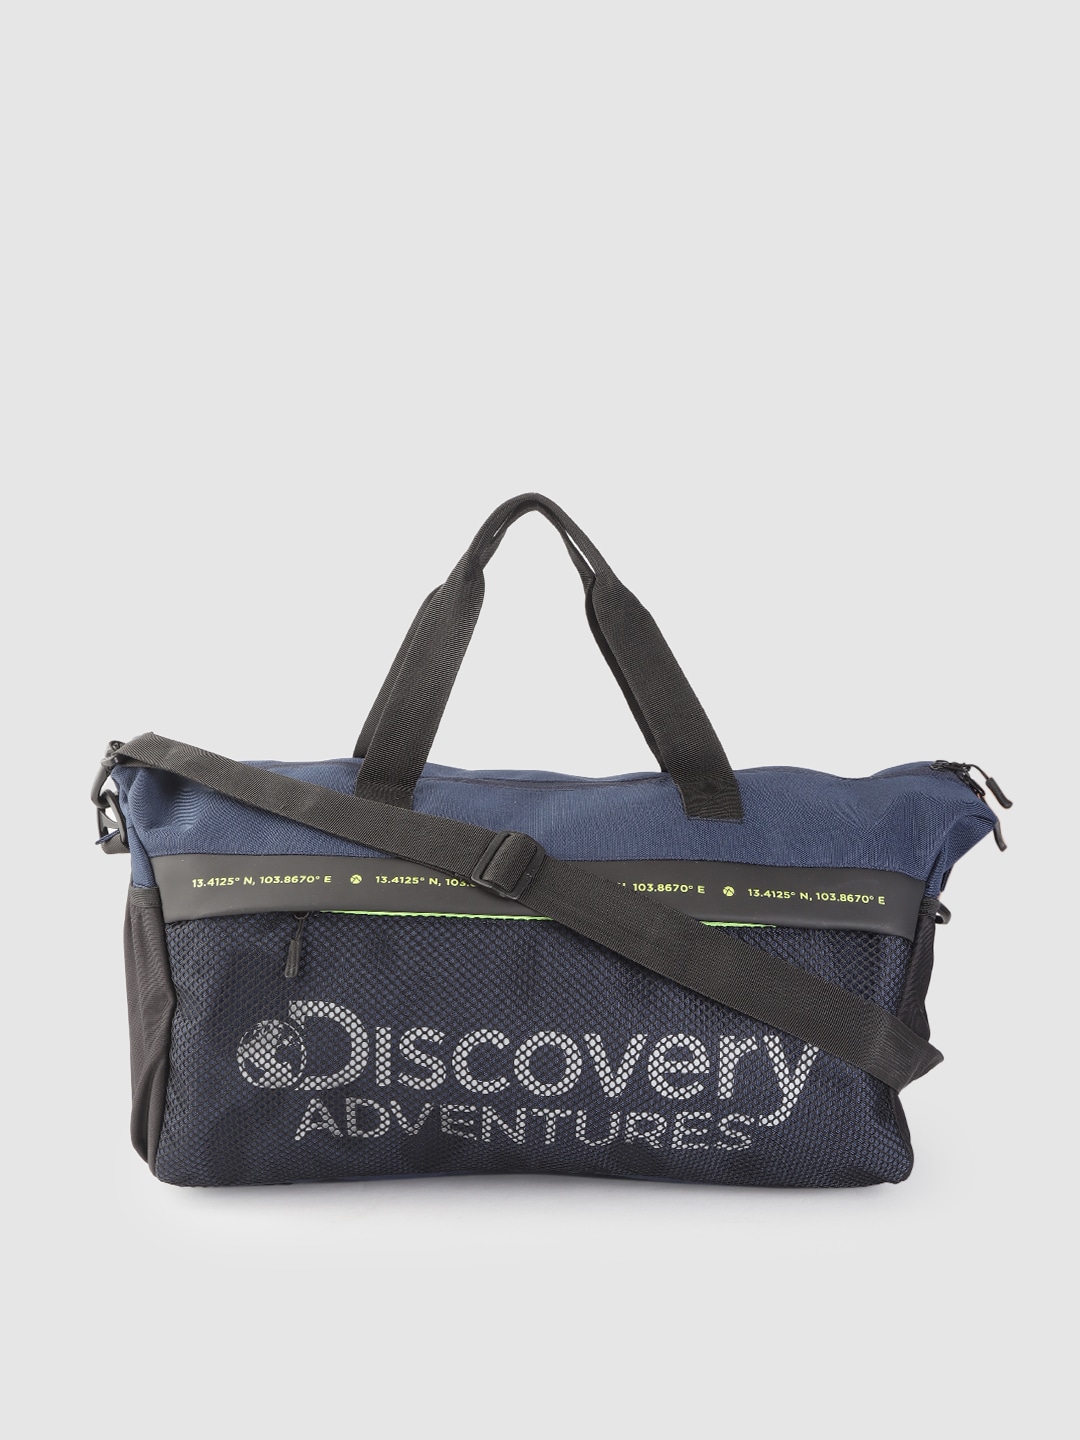 Accessories Duffel Bag | The Roadster Lifestyle Co x Discovery Adventures Unisex Navy & Grey Brand Logo Print Duffel Bag - GF54805